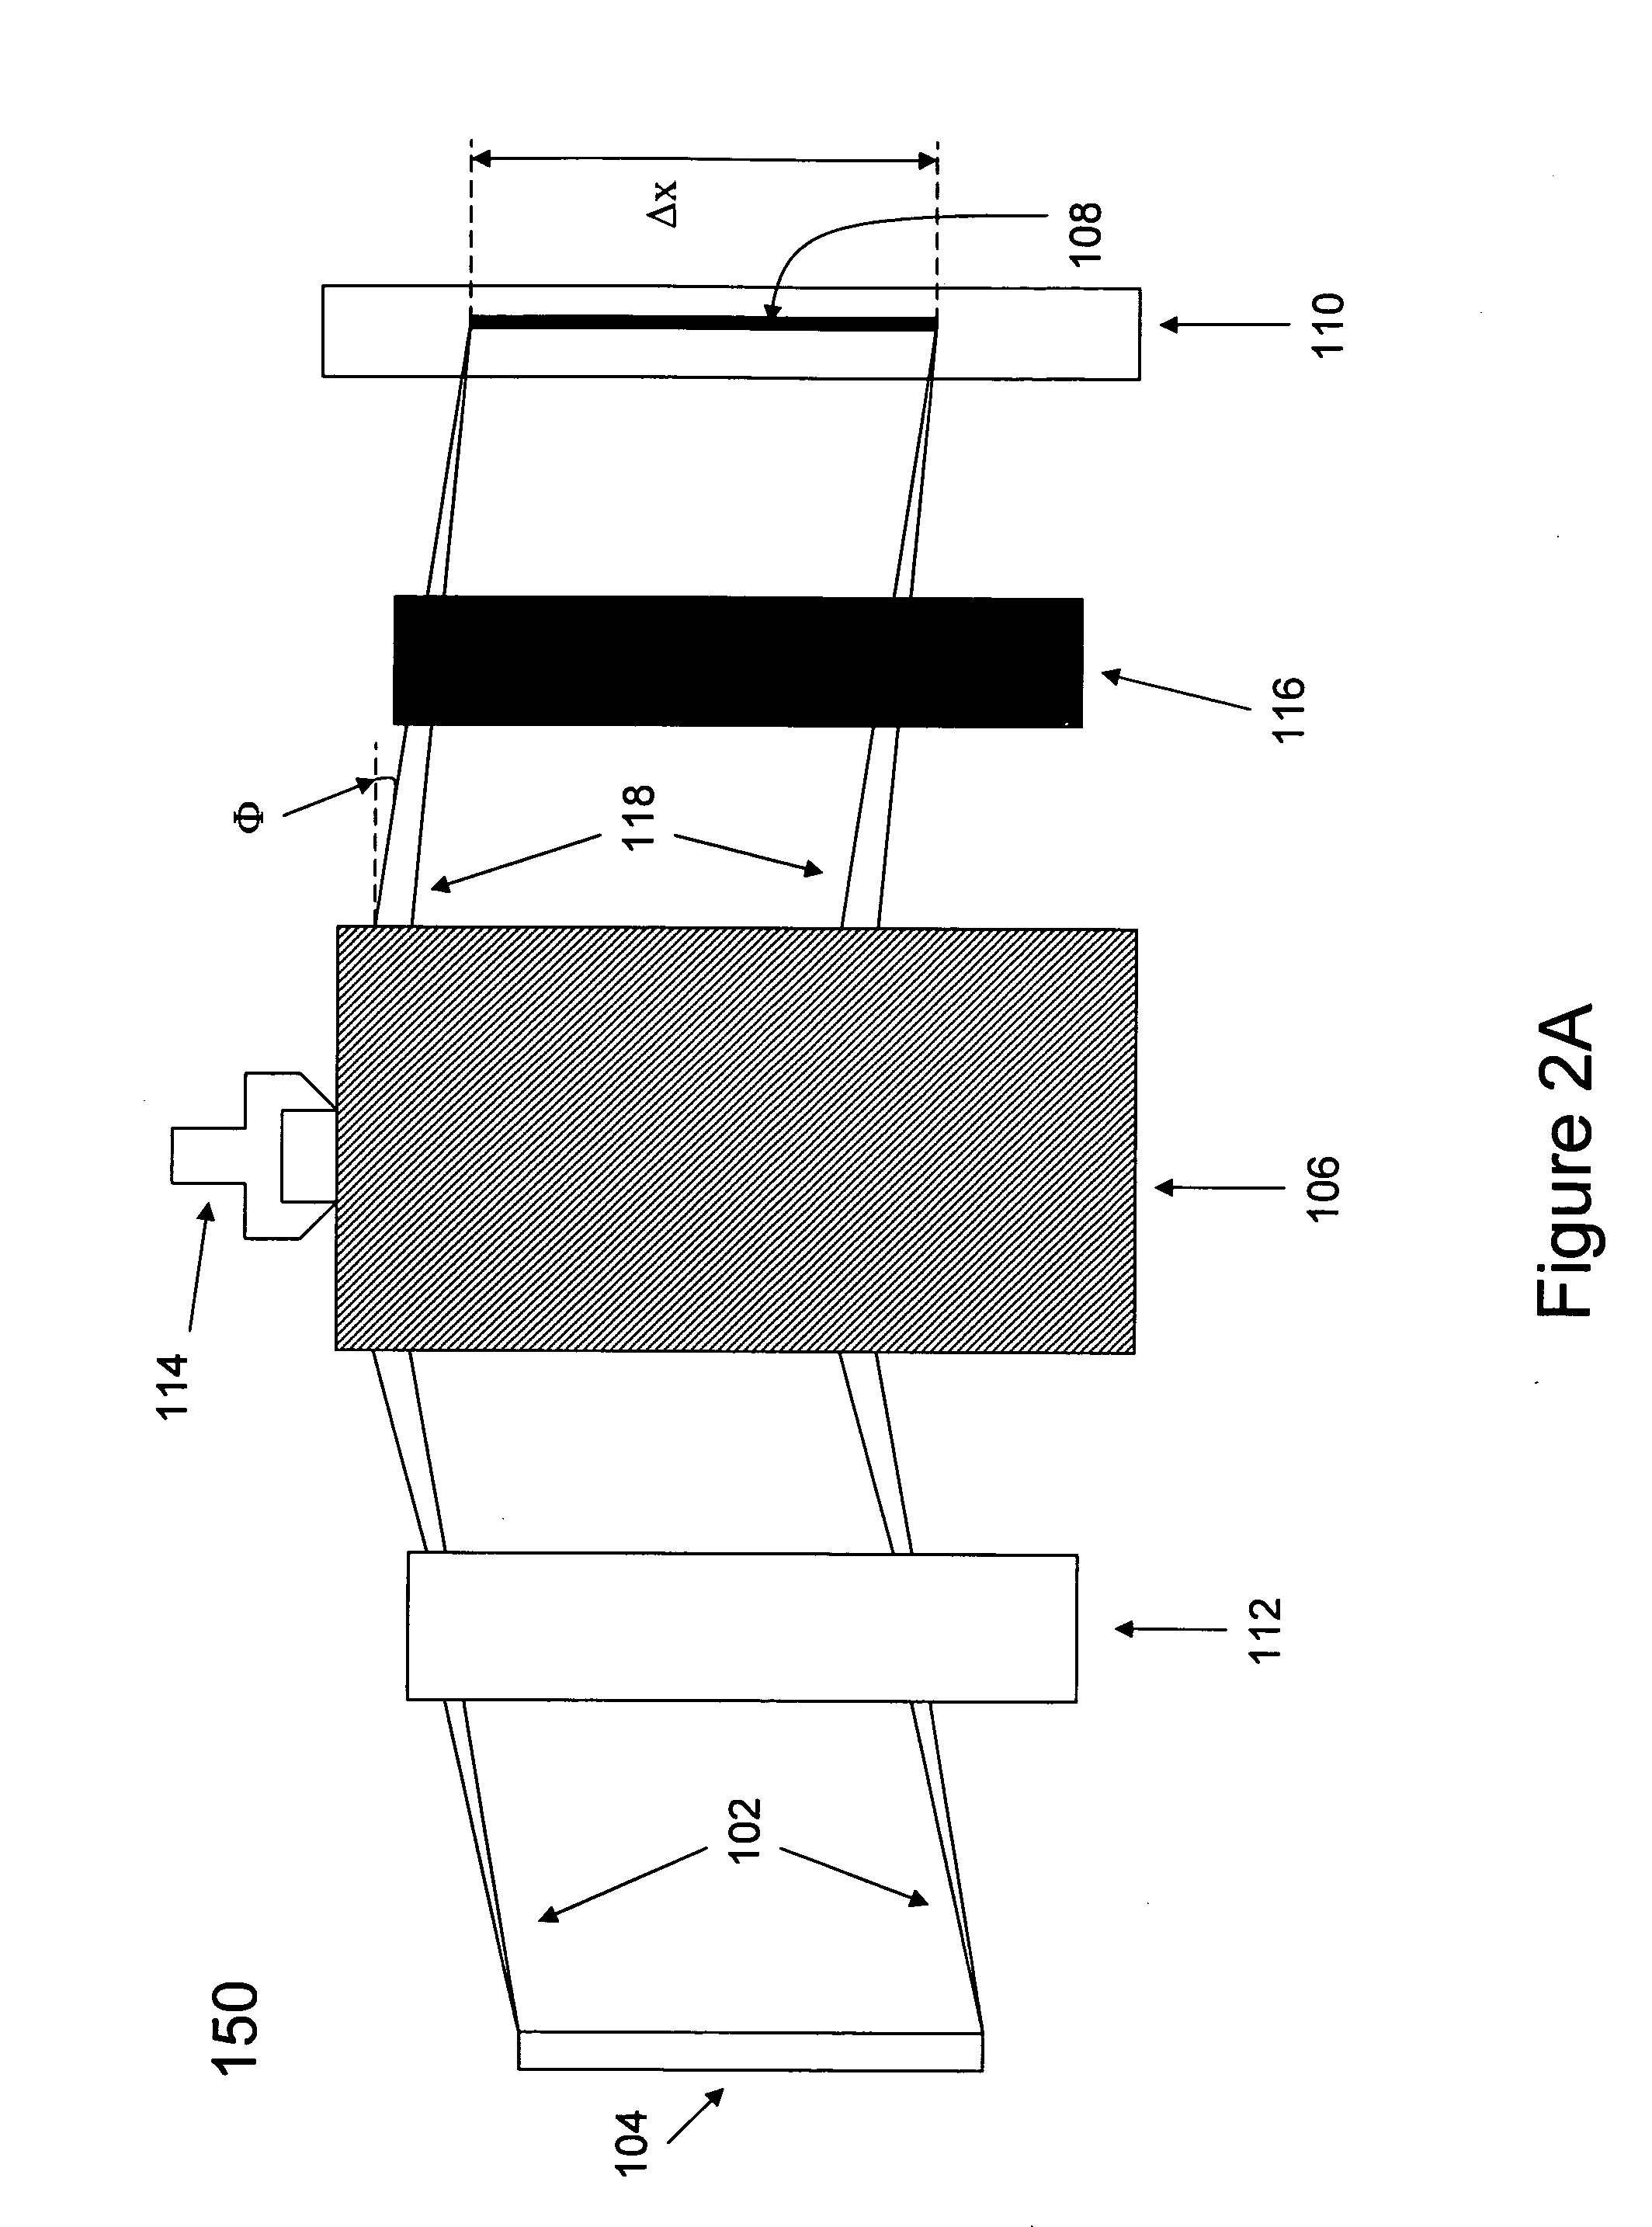 System and method for using diffractive elements for changing the optical pathway